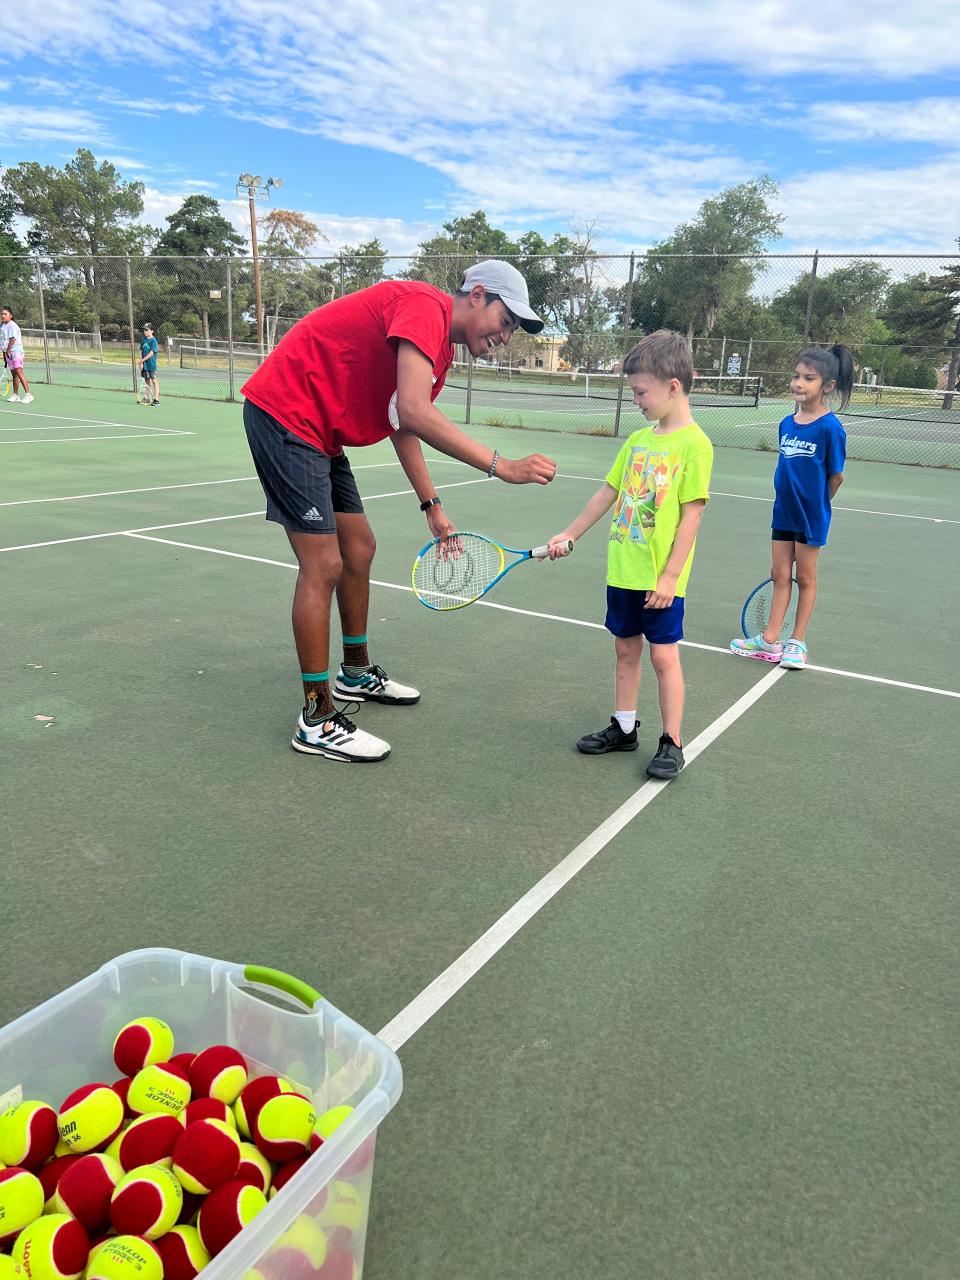 Free drop-in tennis clinics are being offered by the Alex O’Brien Tennis Foundation this summer at Memorial Park.